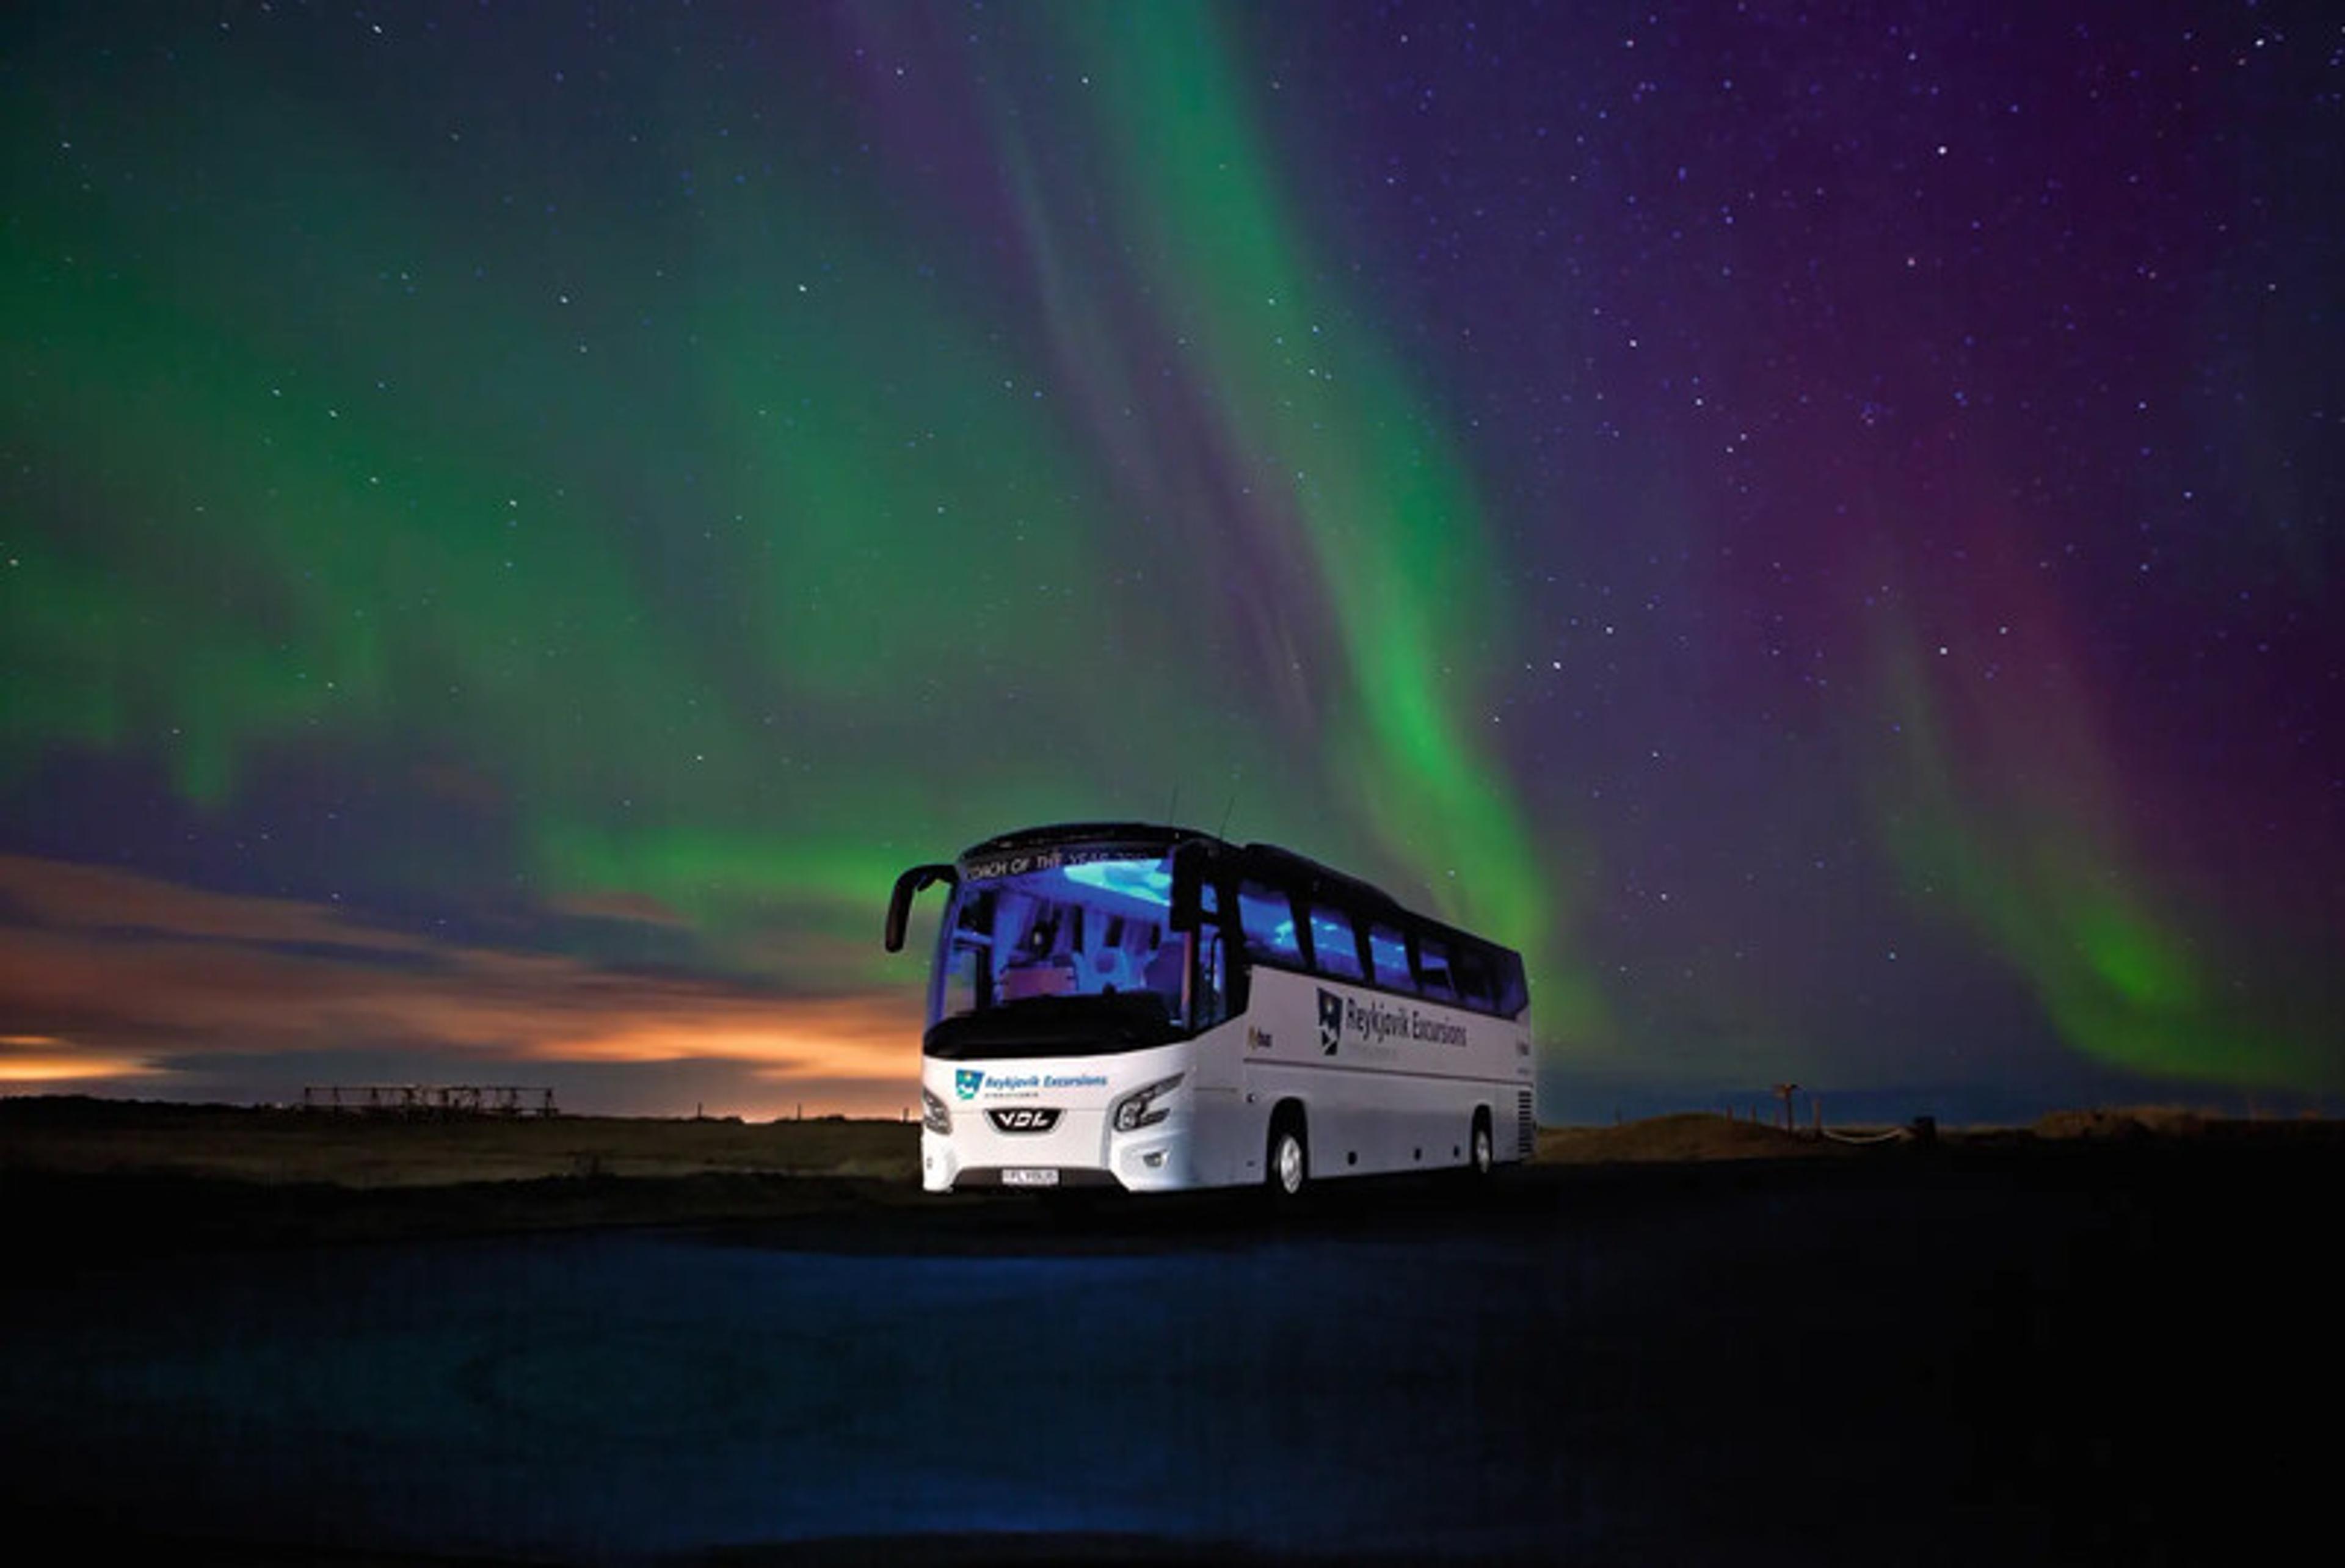 A tour bus is parked under a night sky illuminated by the vivid colors of the Northern Lights, with shades of green and purple dancing across the horizon.